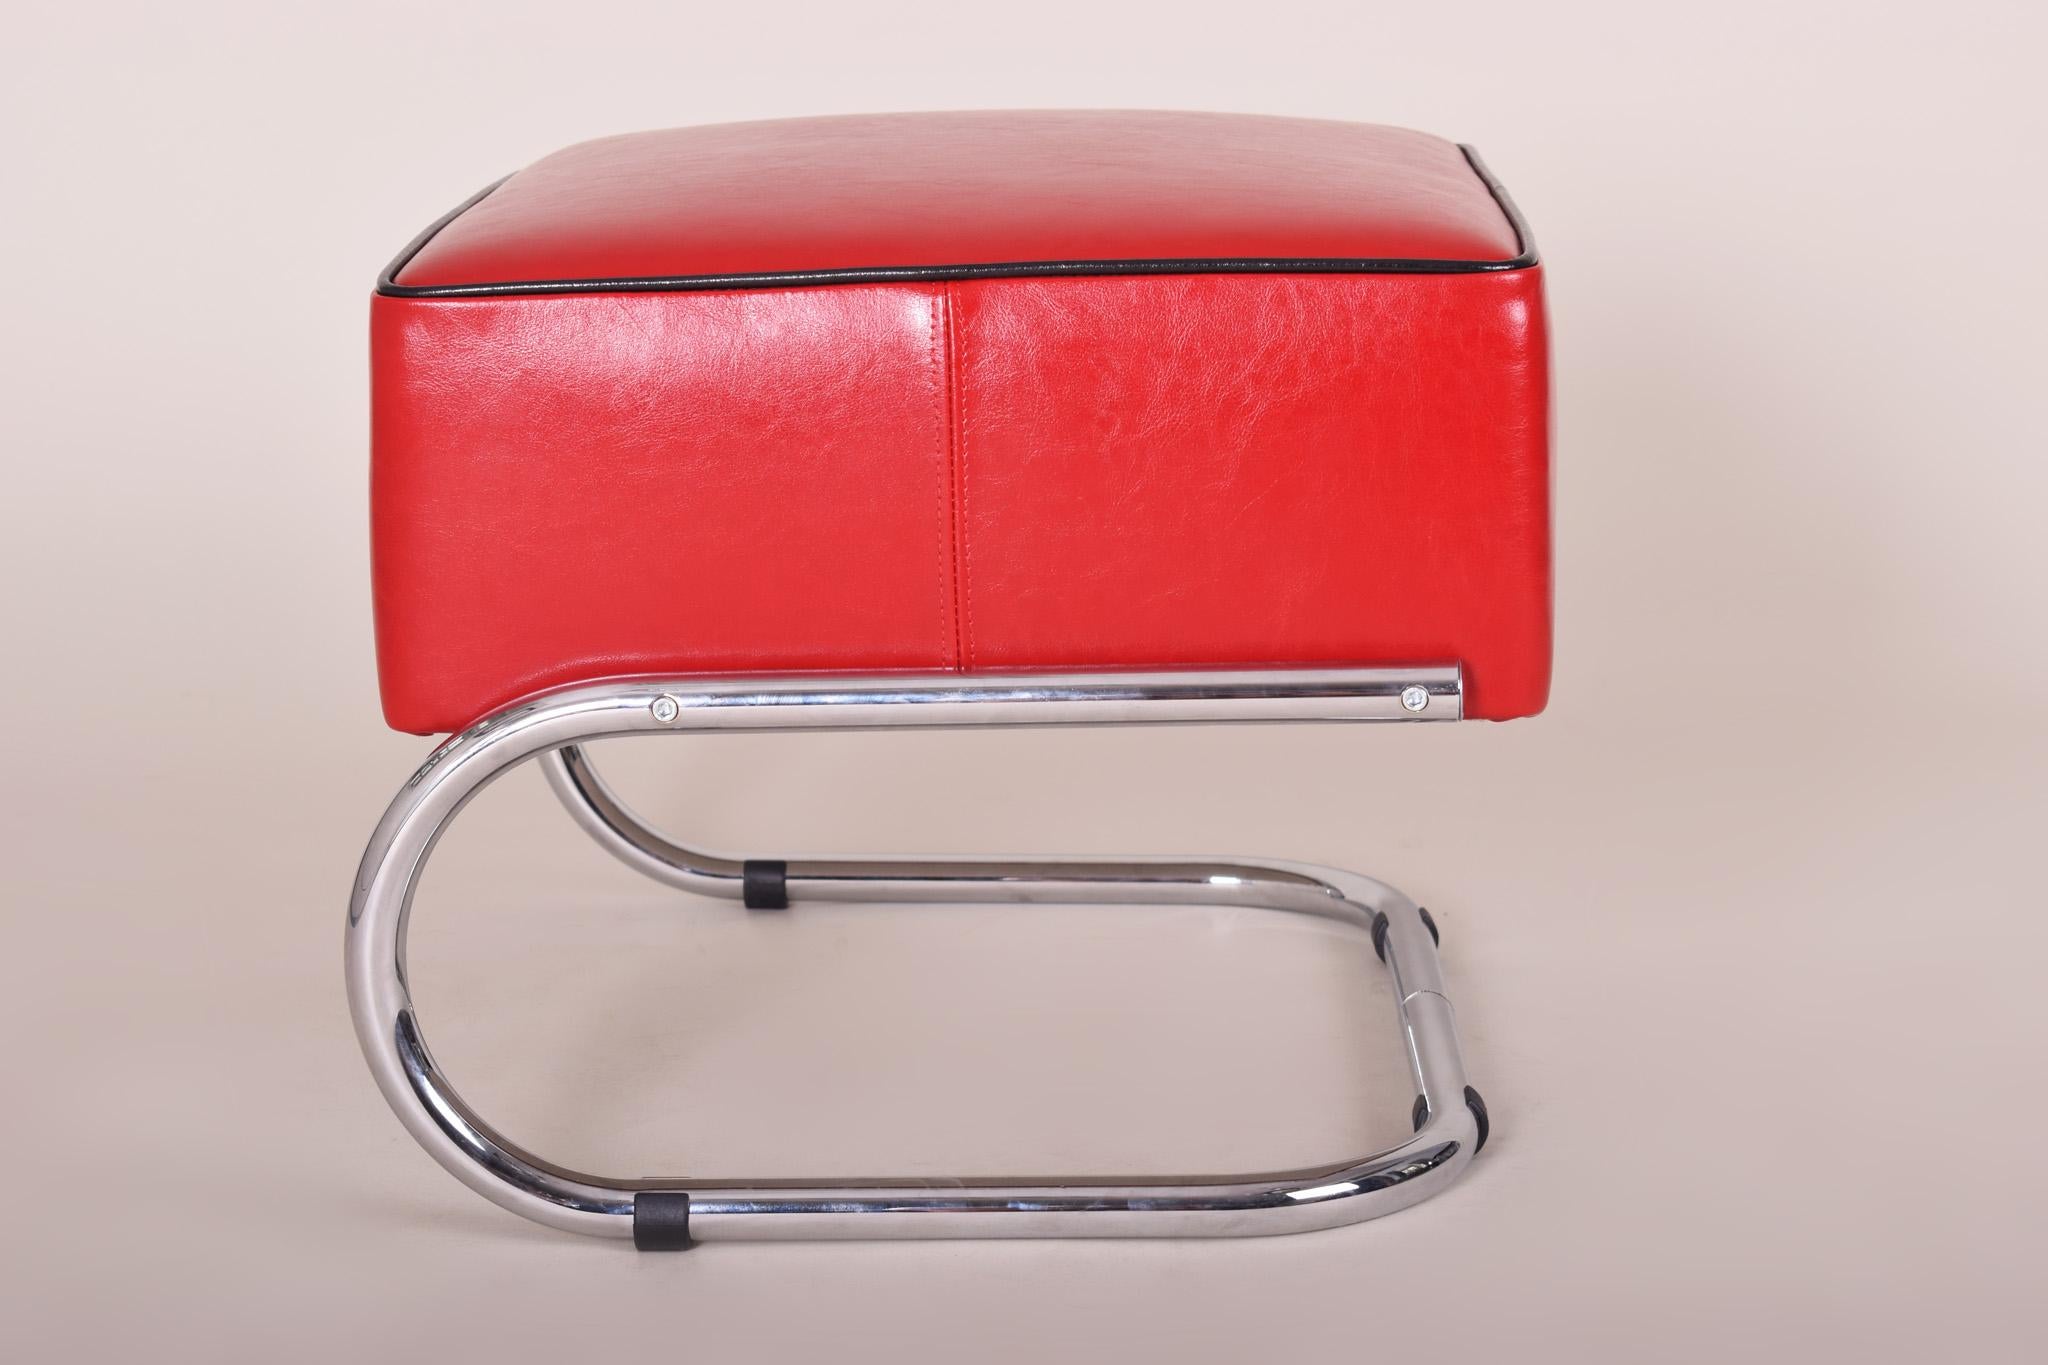 Pair of Modernist Tubular Steel Stools, Black and Red Leather, Chrome, 1930-1939 For Sale 2